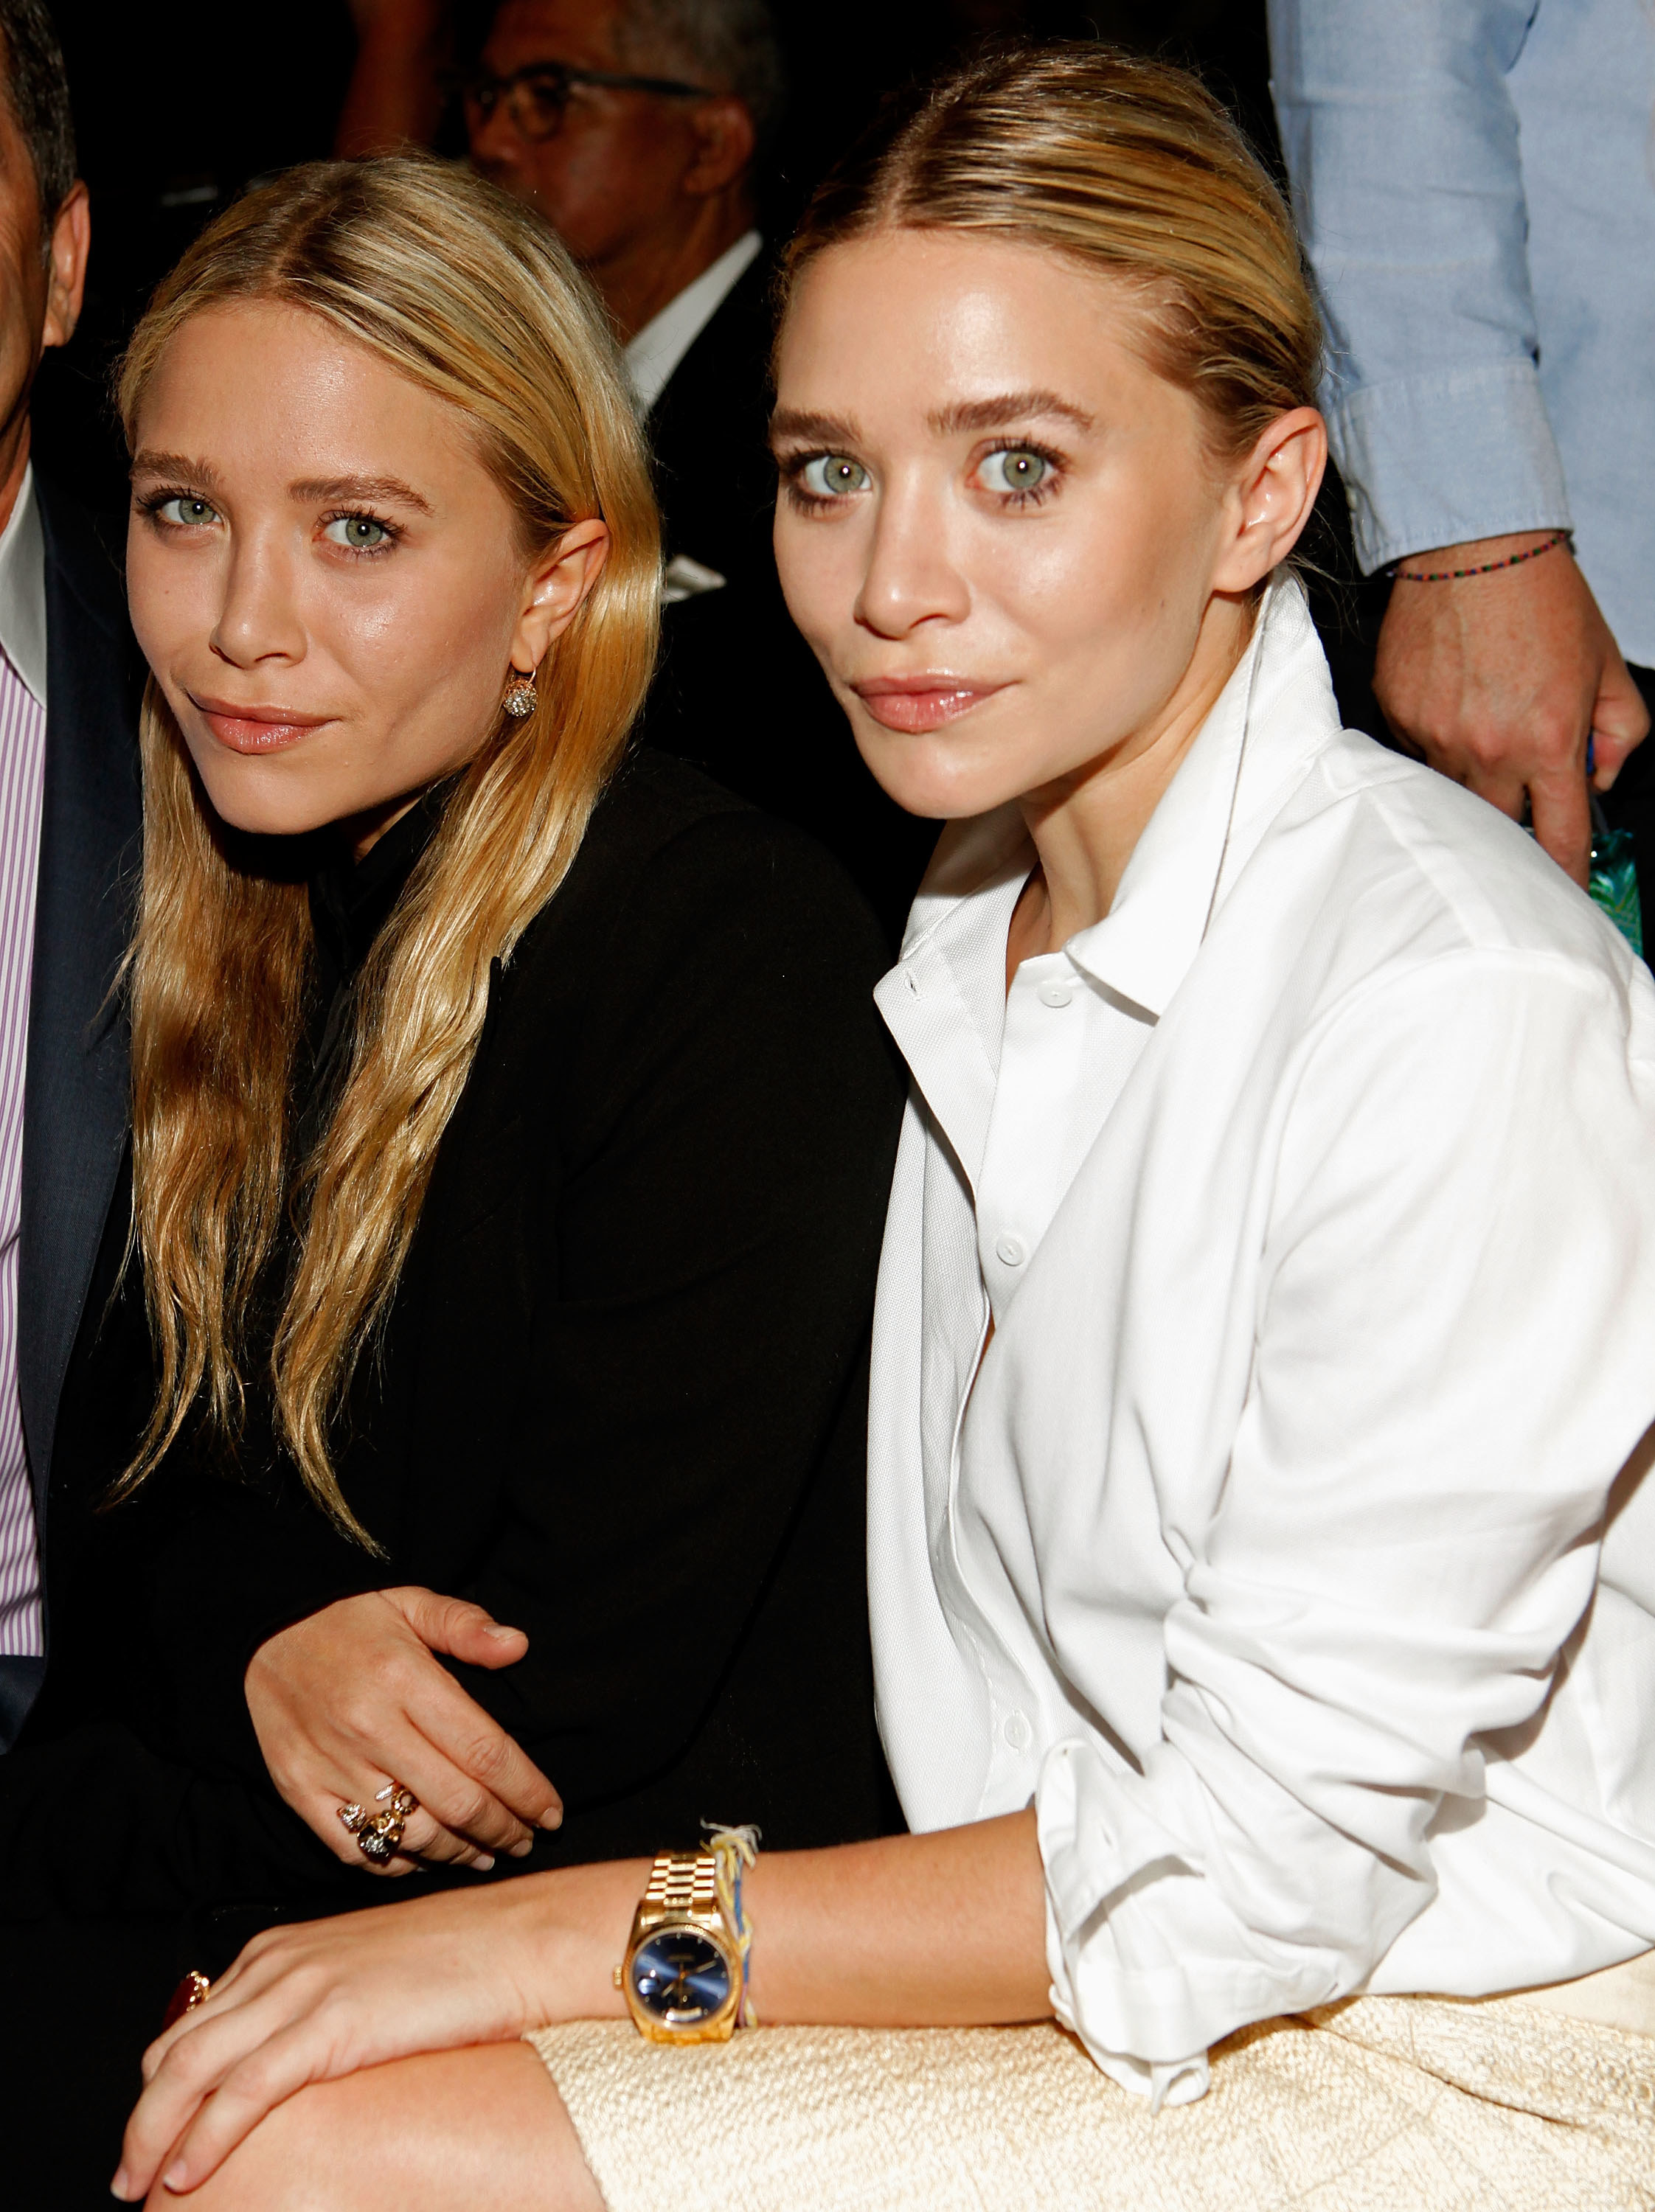 The Olsen twins sitting together